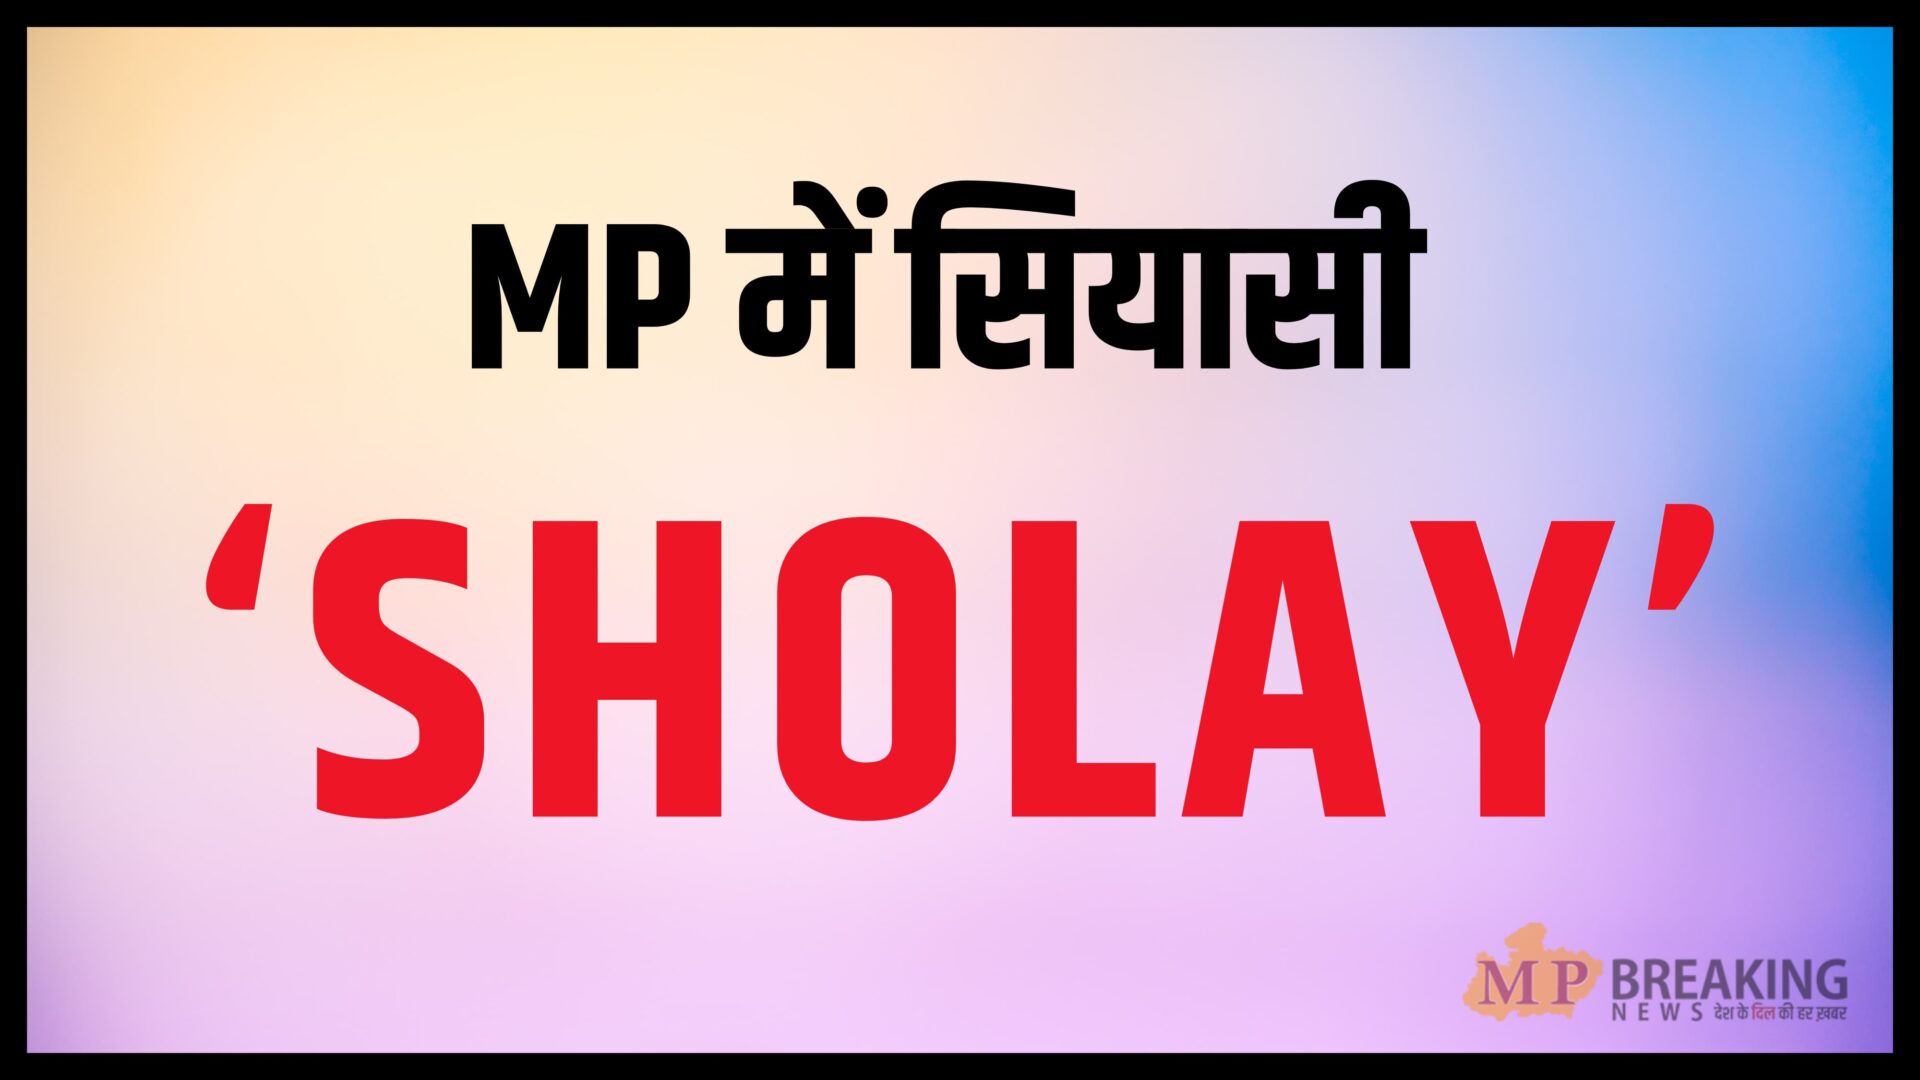 Edited video of Sholay film